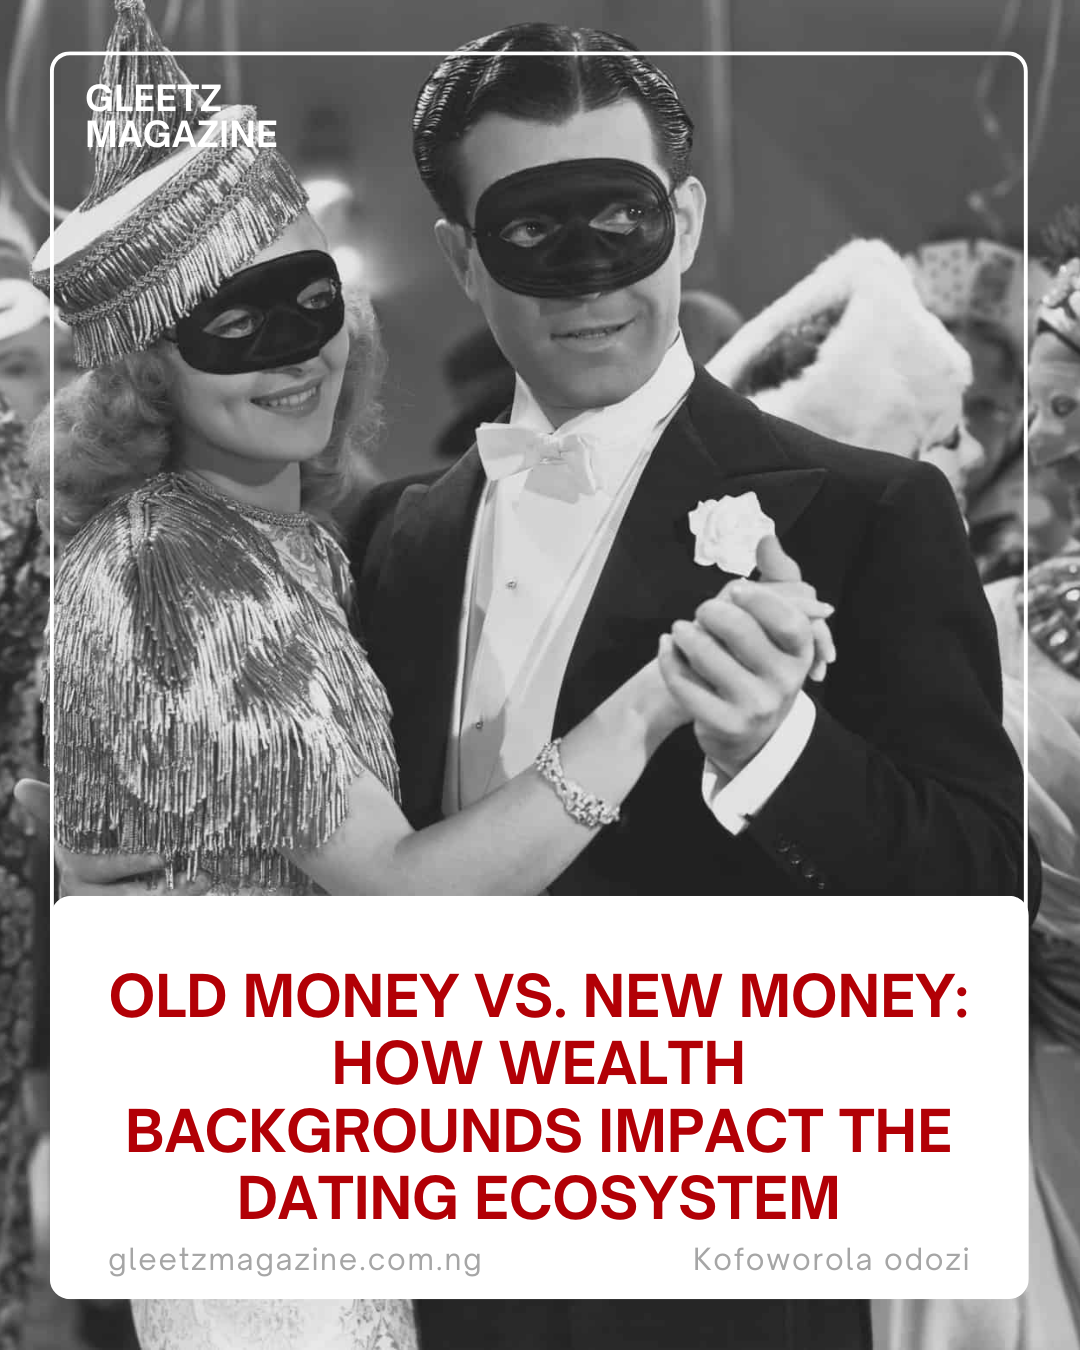 Old Money vs. New Money: How Wealth Backgrounds Impact the Dating Ecosystem